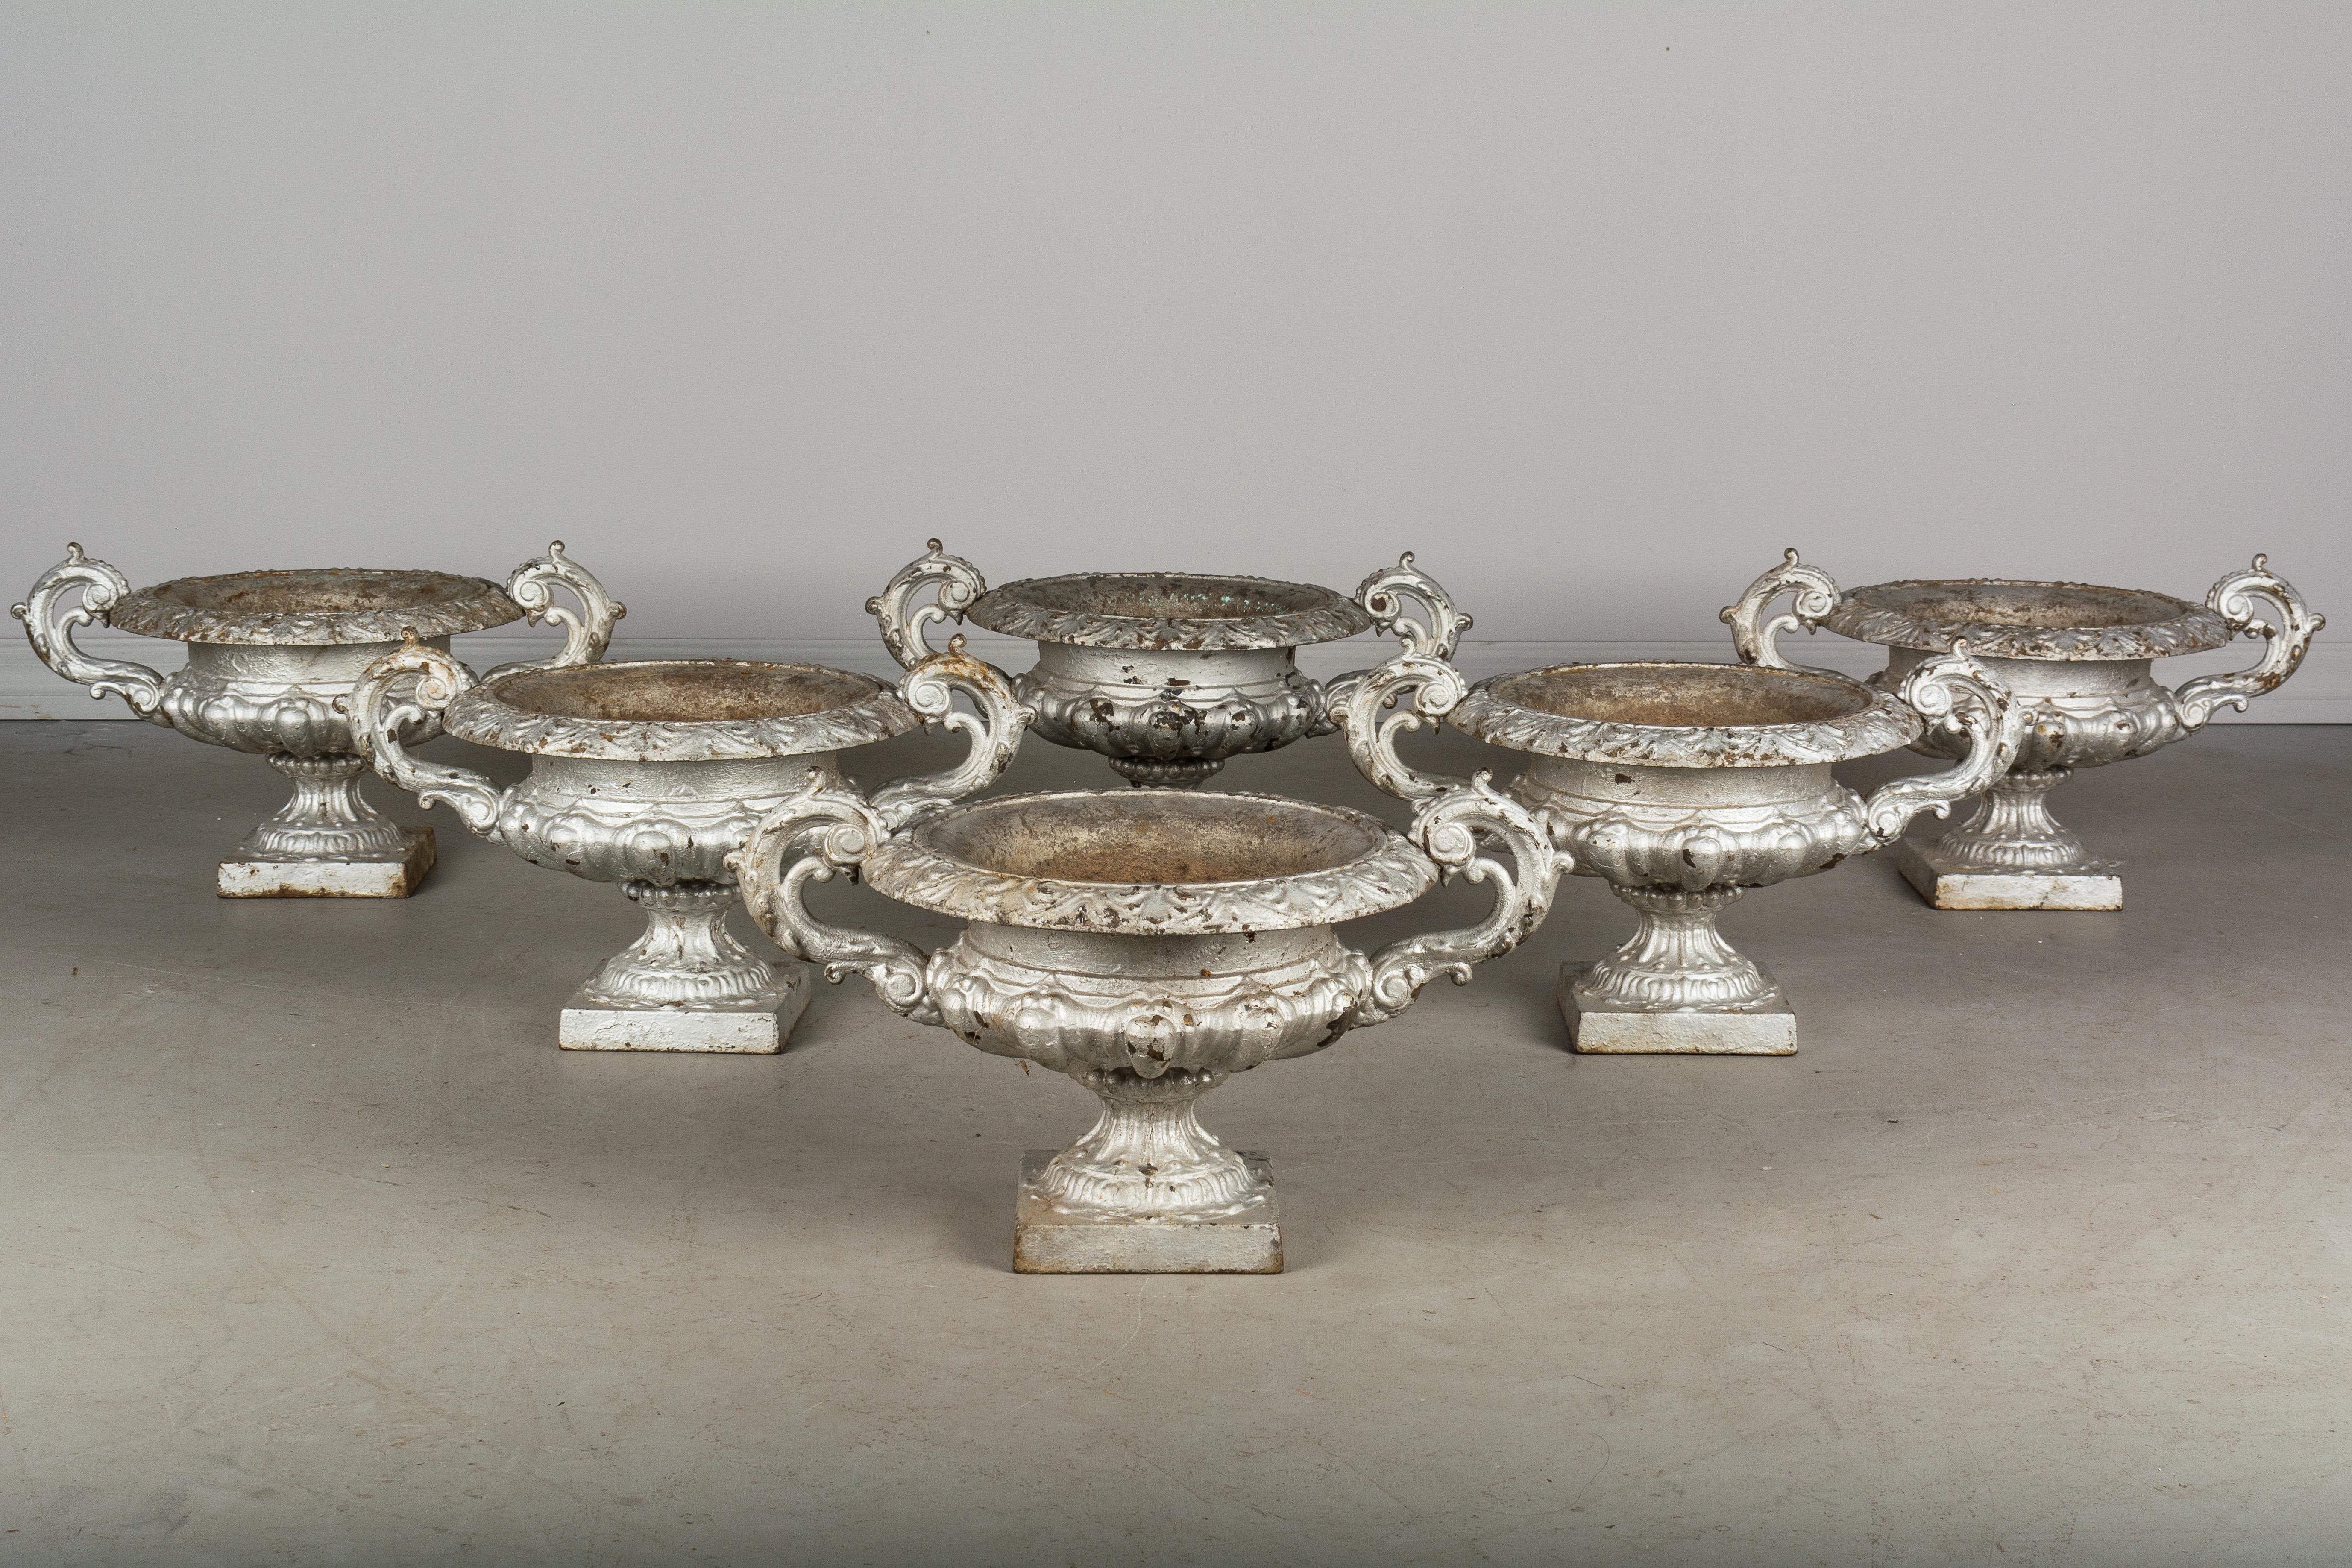 A set of six 19th century French cast iron garden urns, or planters with weathered silver painted patina.
Weight: 22 pounds each. Measures: Overall: 20.5